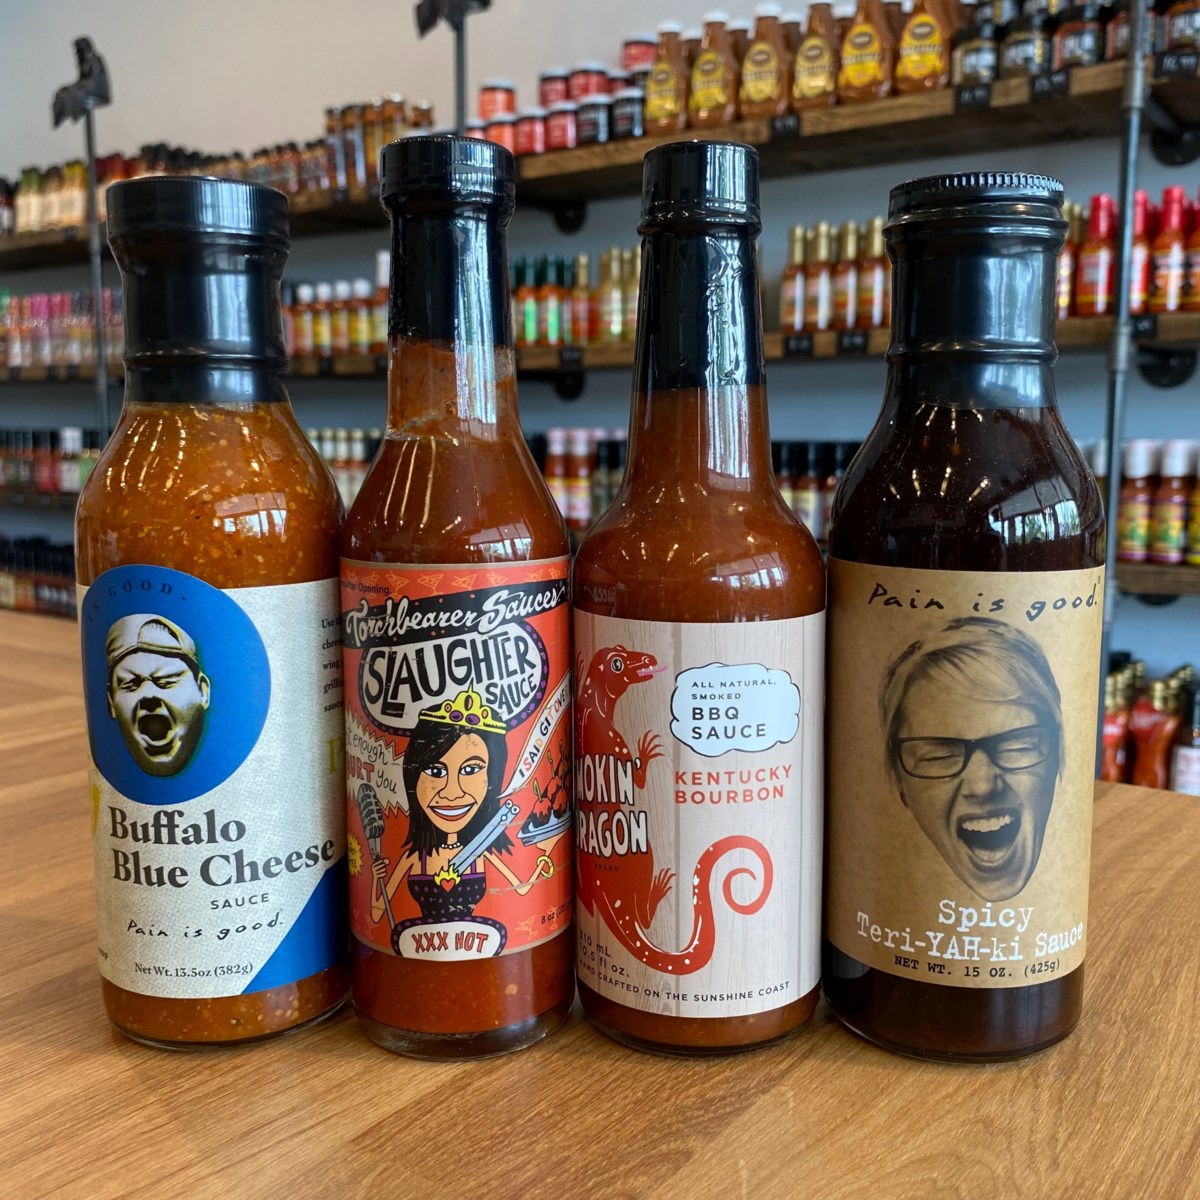 Montreal hot sauce featured on popular online show 'Hot Ones